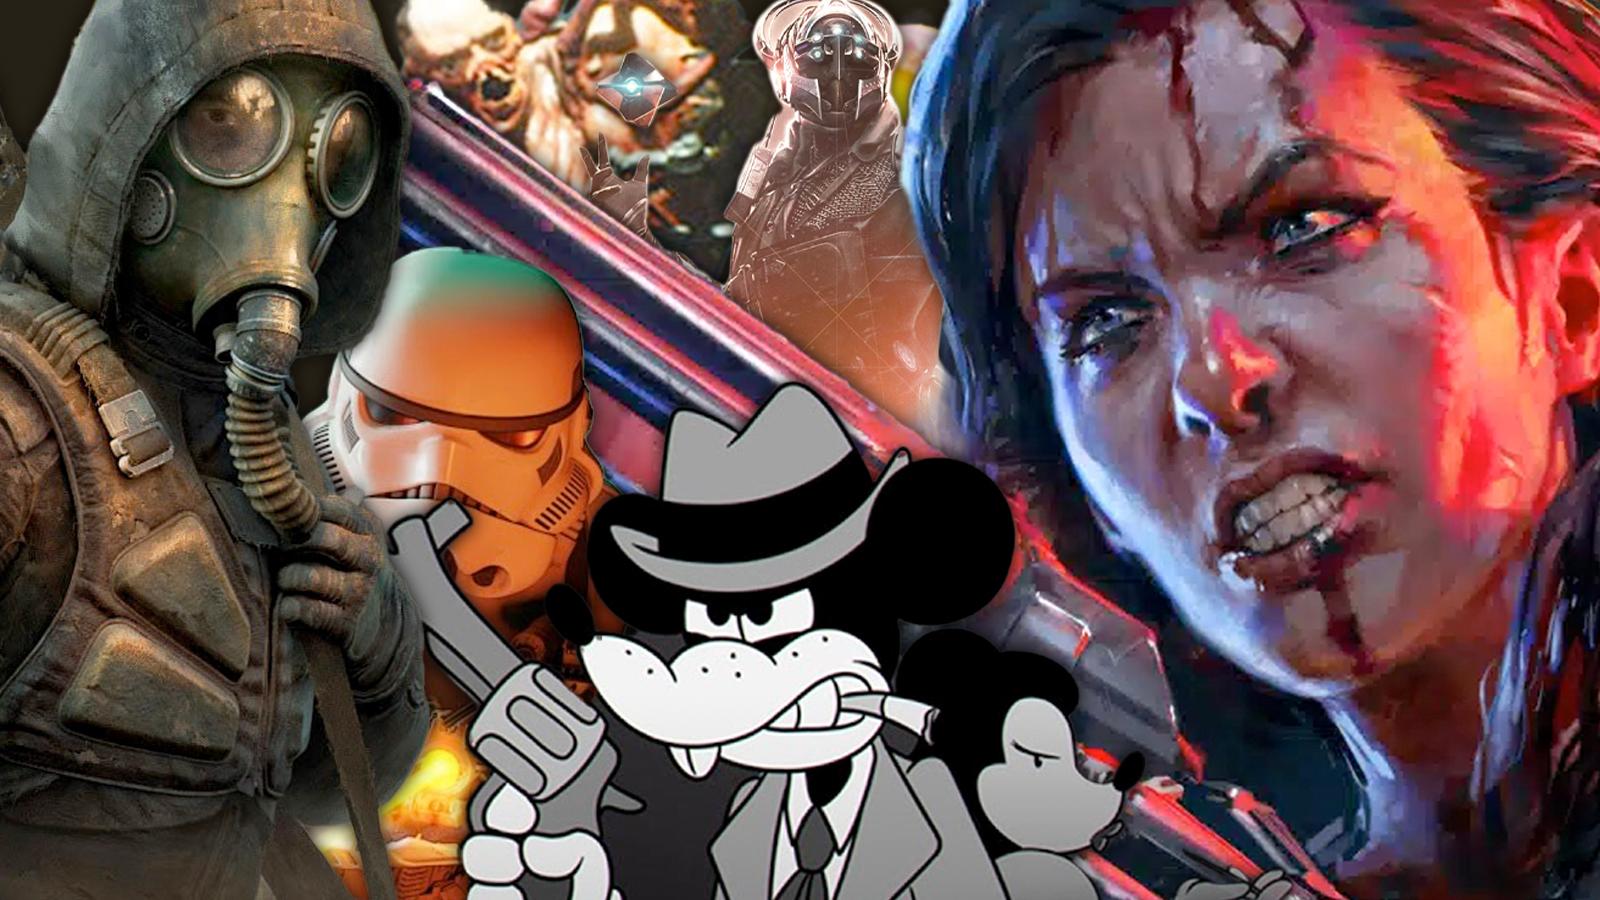 collage of fps characters from the article. from left to right: Stalker 2 key character art stormtrooper mouse holding a gun phantom fury main character bombshell looking angry with blood above mouse filling in the gap on the black background is a monster from ripout and a destiny 2 player character